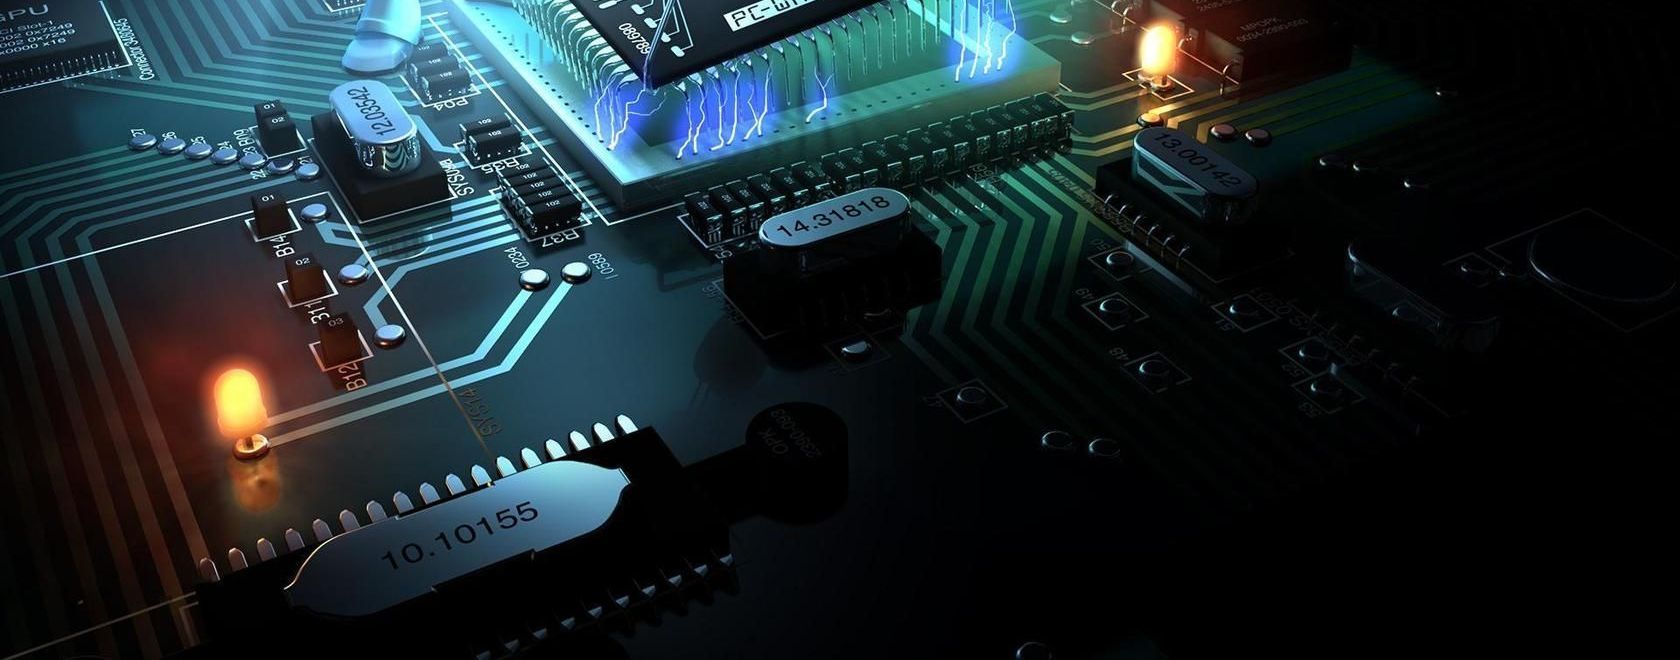 Embedded System ICs soldered onto global circuit board